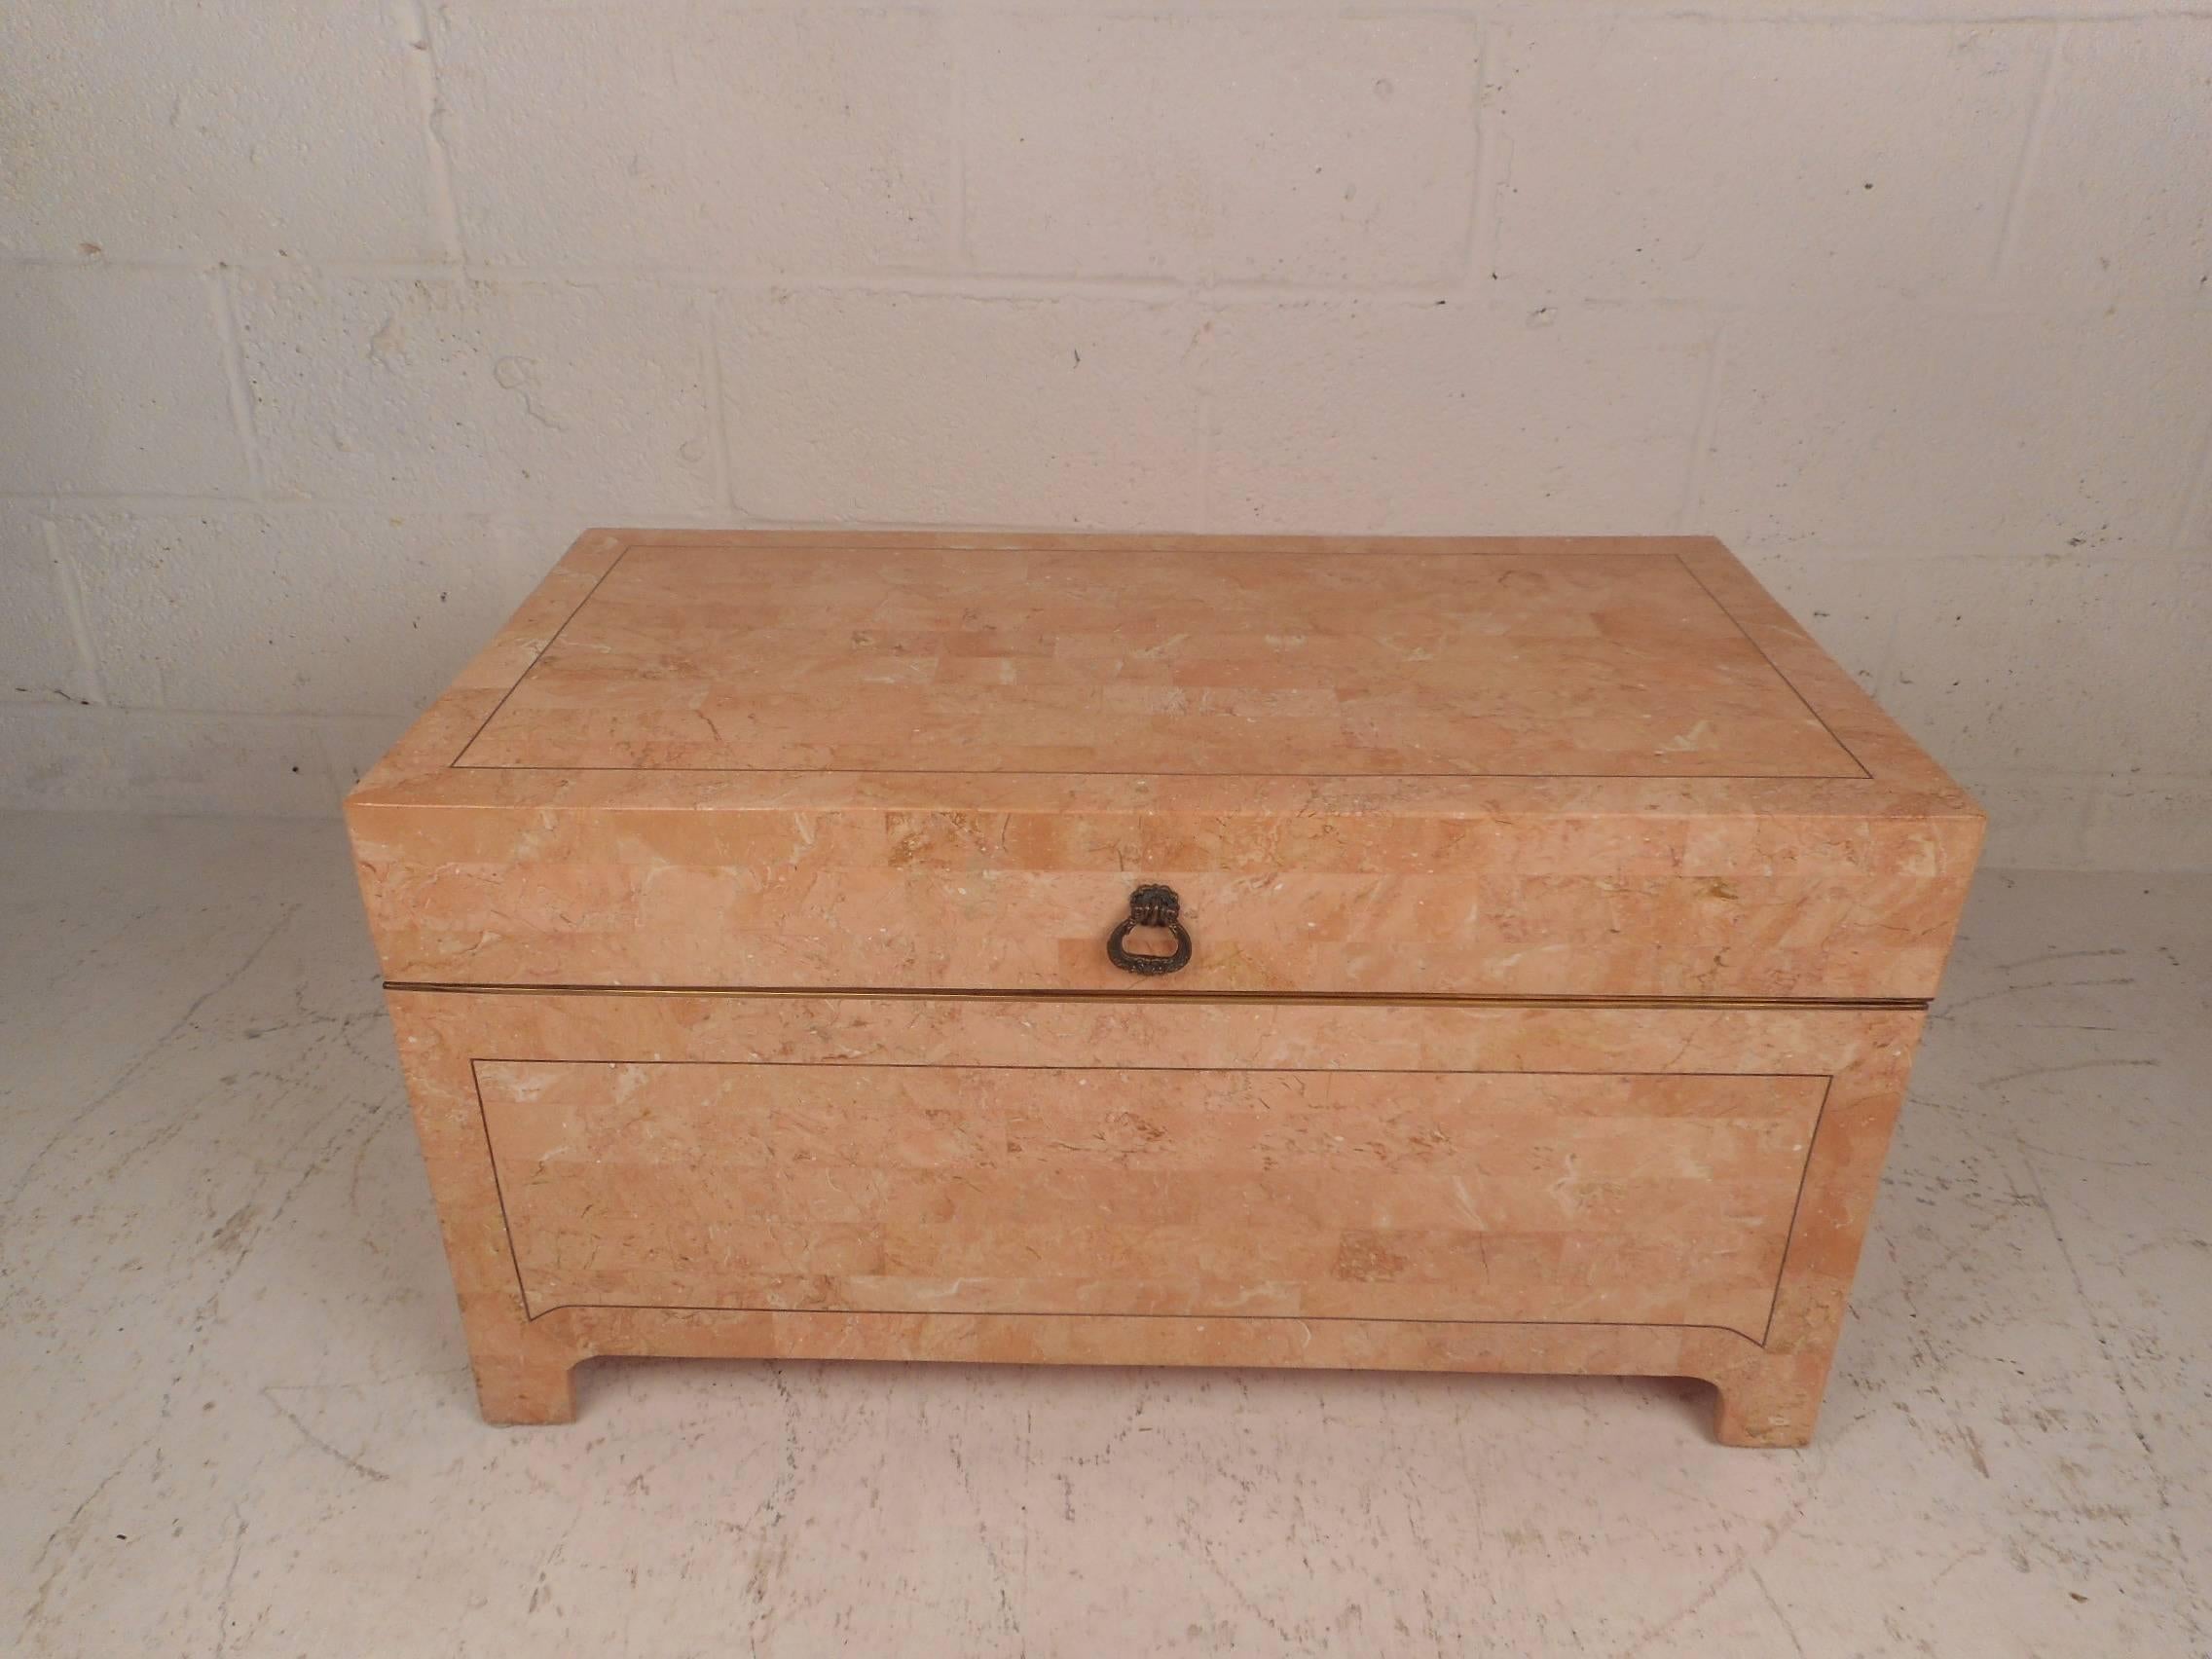 This Mid-Century Modern storage box is made of pink tessellated stone. Brass inlaid trim, unique feet, and an elaborate stone design sets this stylish box apart from others. Three sculpted brass handles offer convenient moving and opening of this